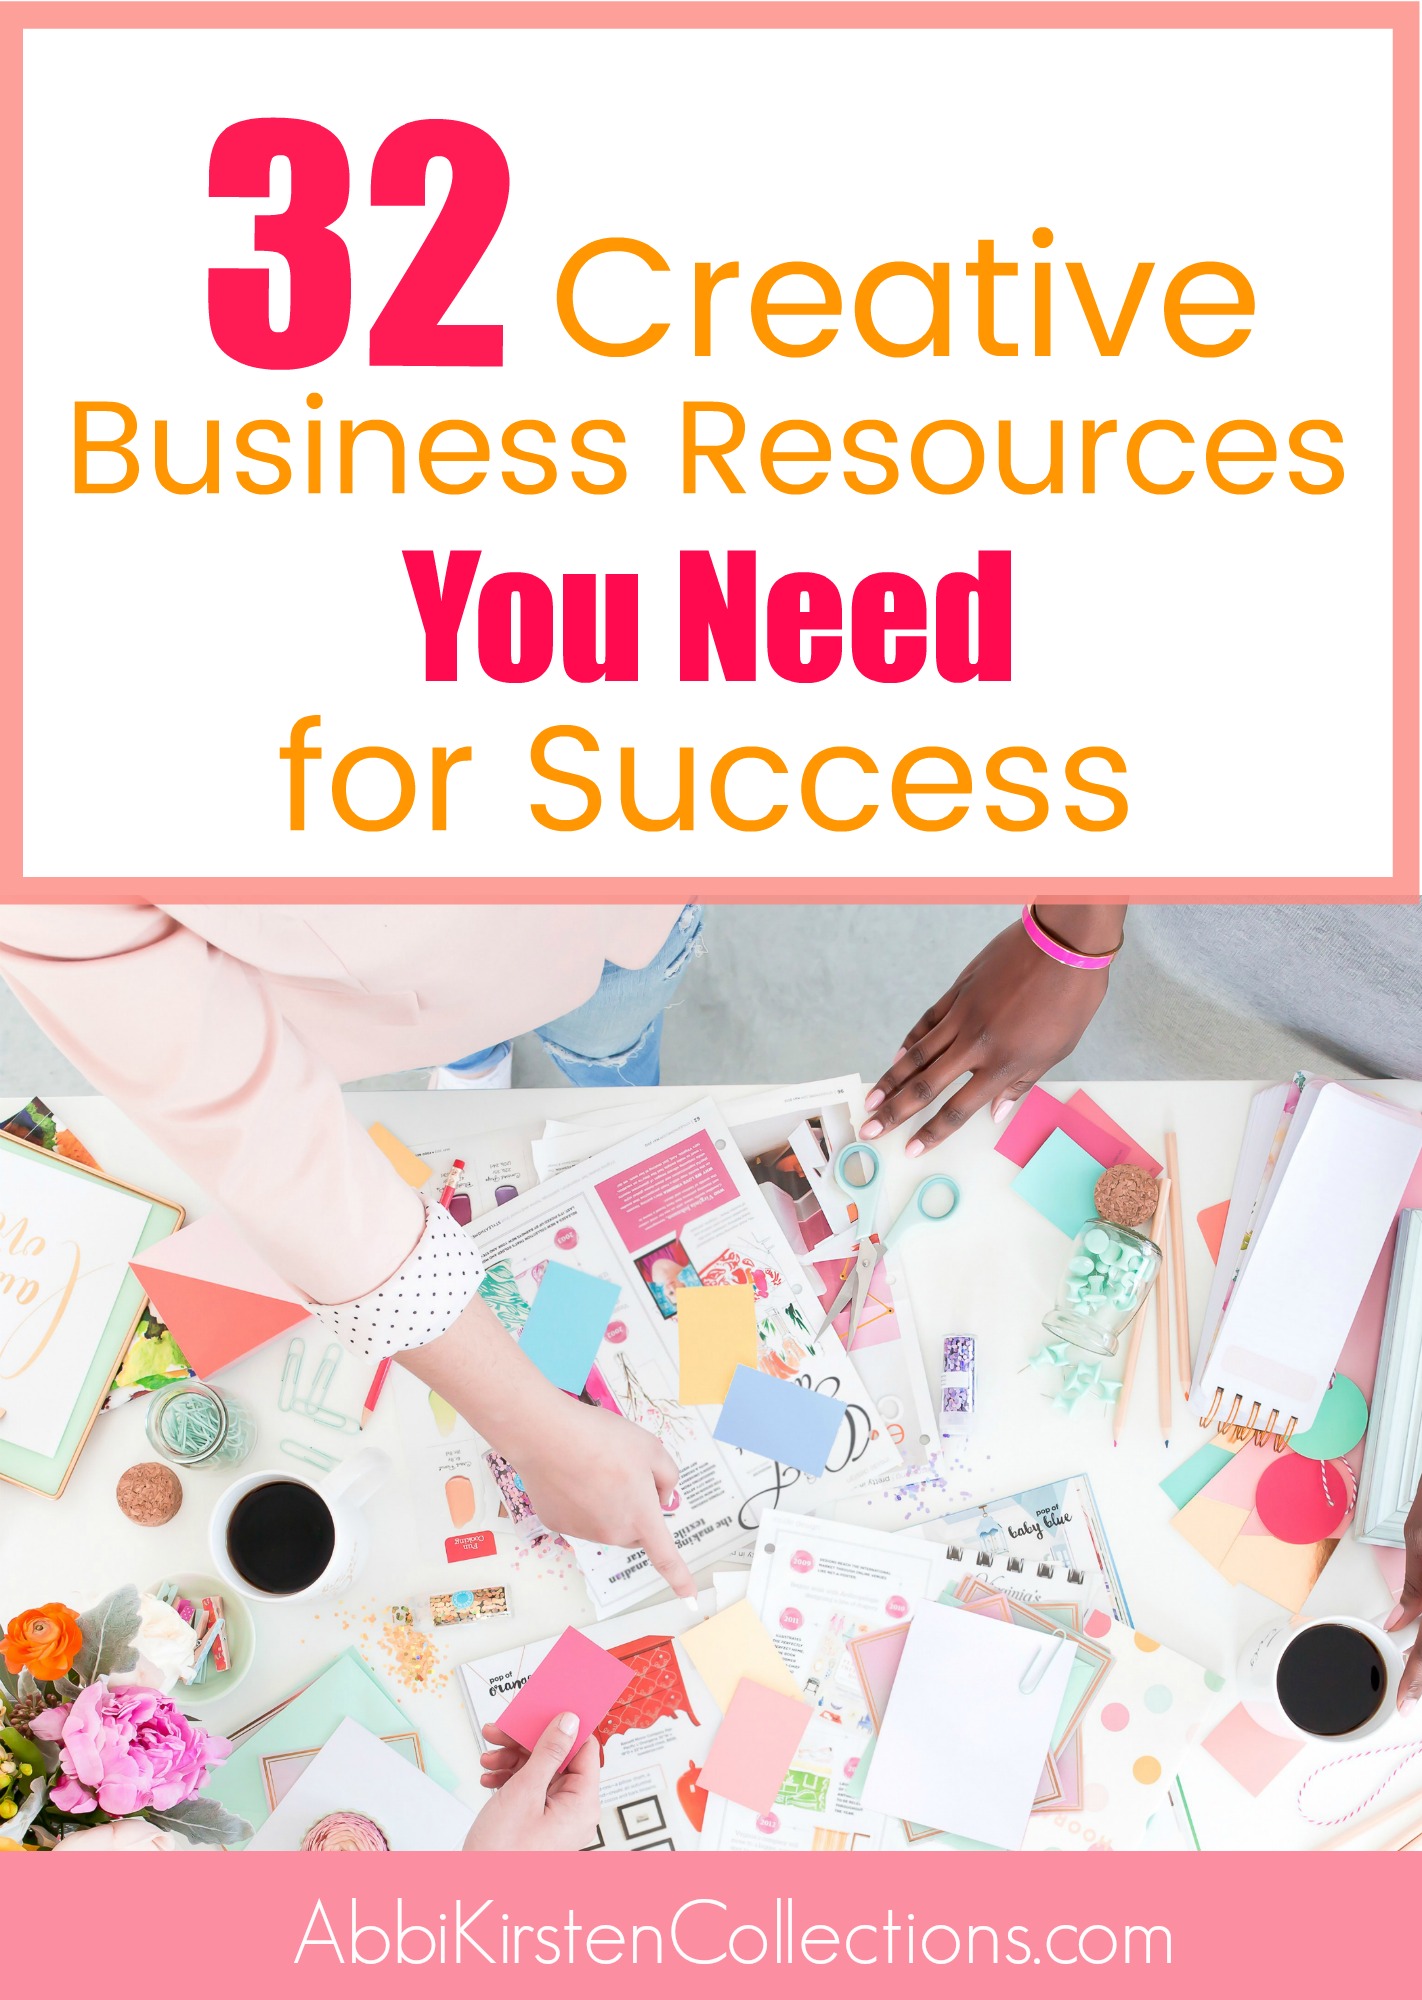 A graphic with a photo of a woman’s arm pointing to the piles of craft and business supplies on a cluttered desktop filled with papers, paint color swatches, business docs, and supplies. The text above the photo reads, “32 Creative Business Resources You Need For Success.” At the bottom, the text reads, “AbbiKirstenCollections.com.”